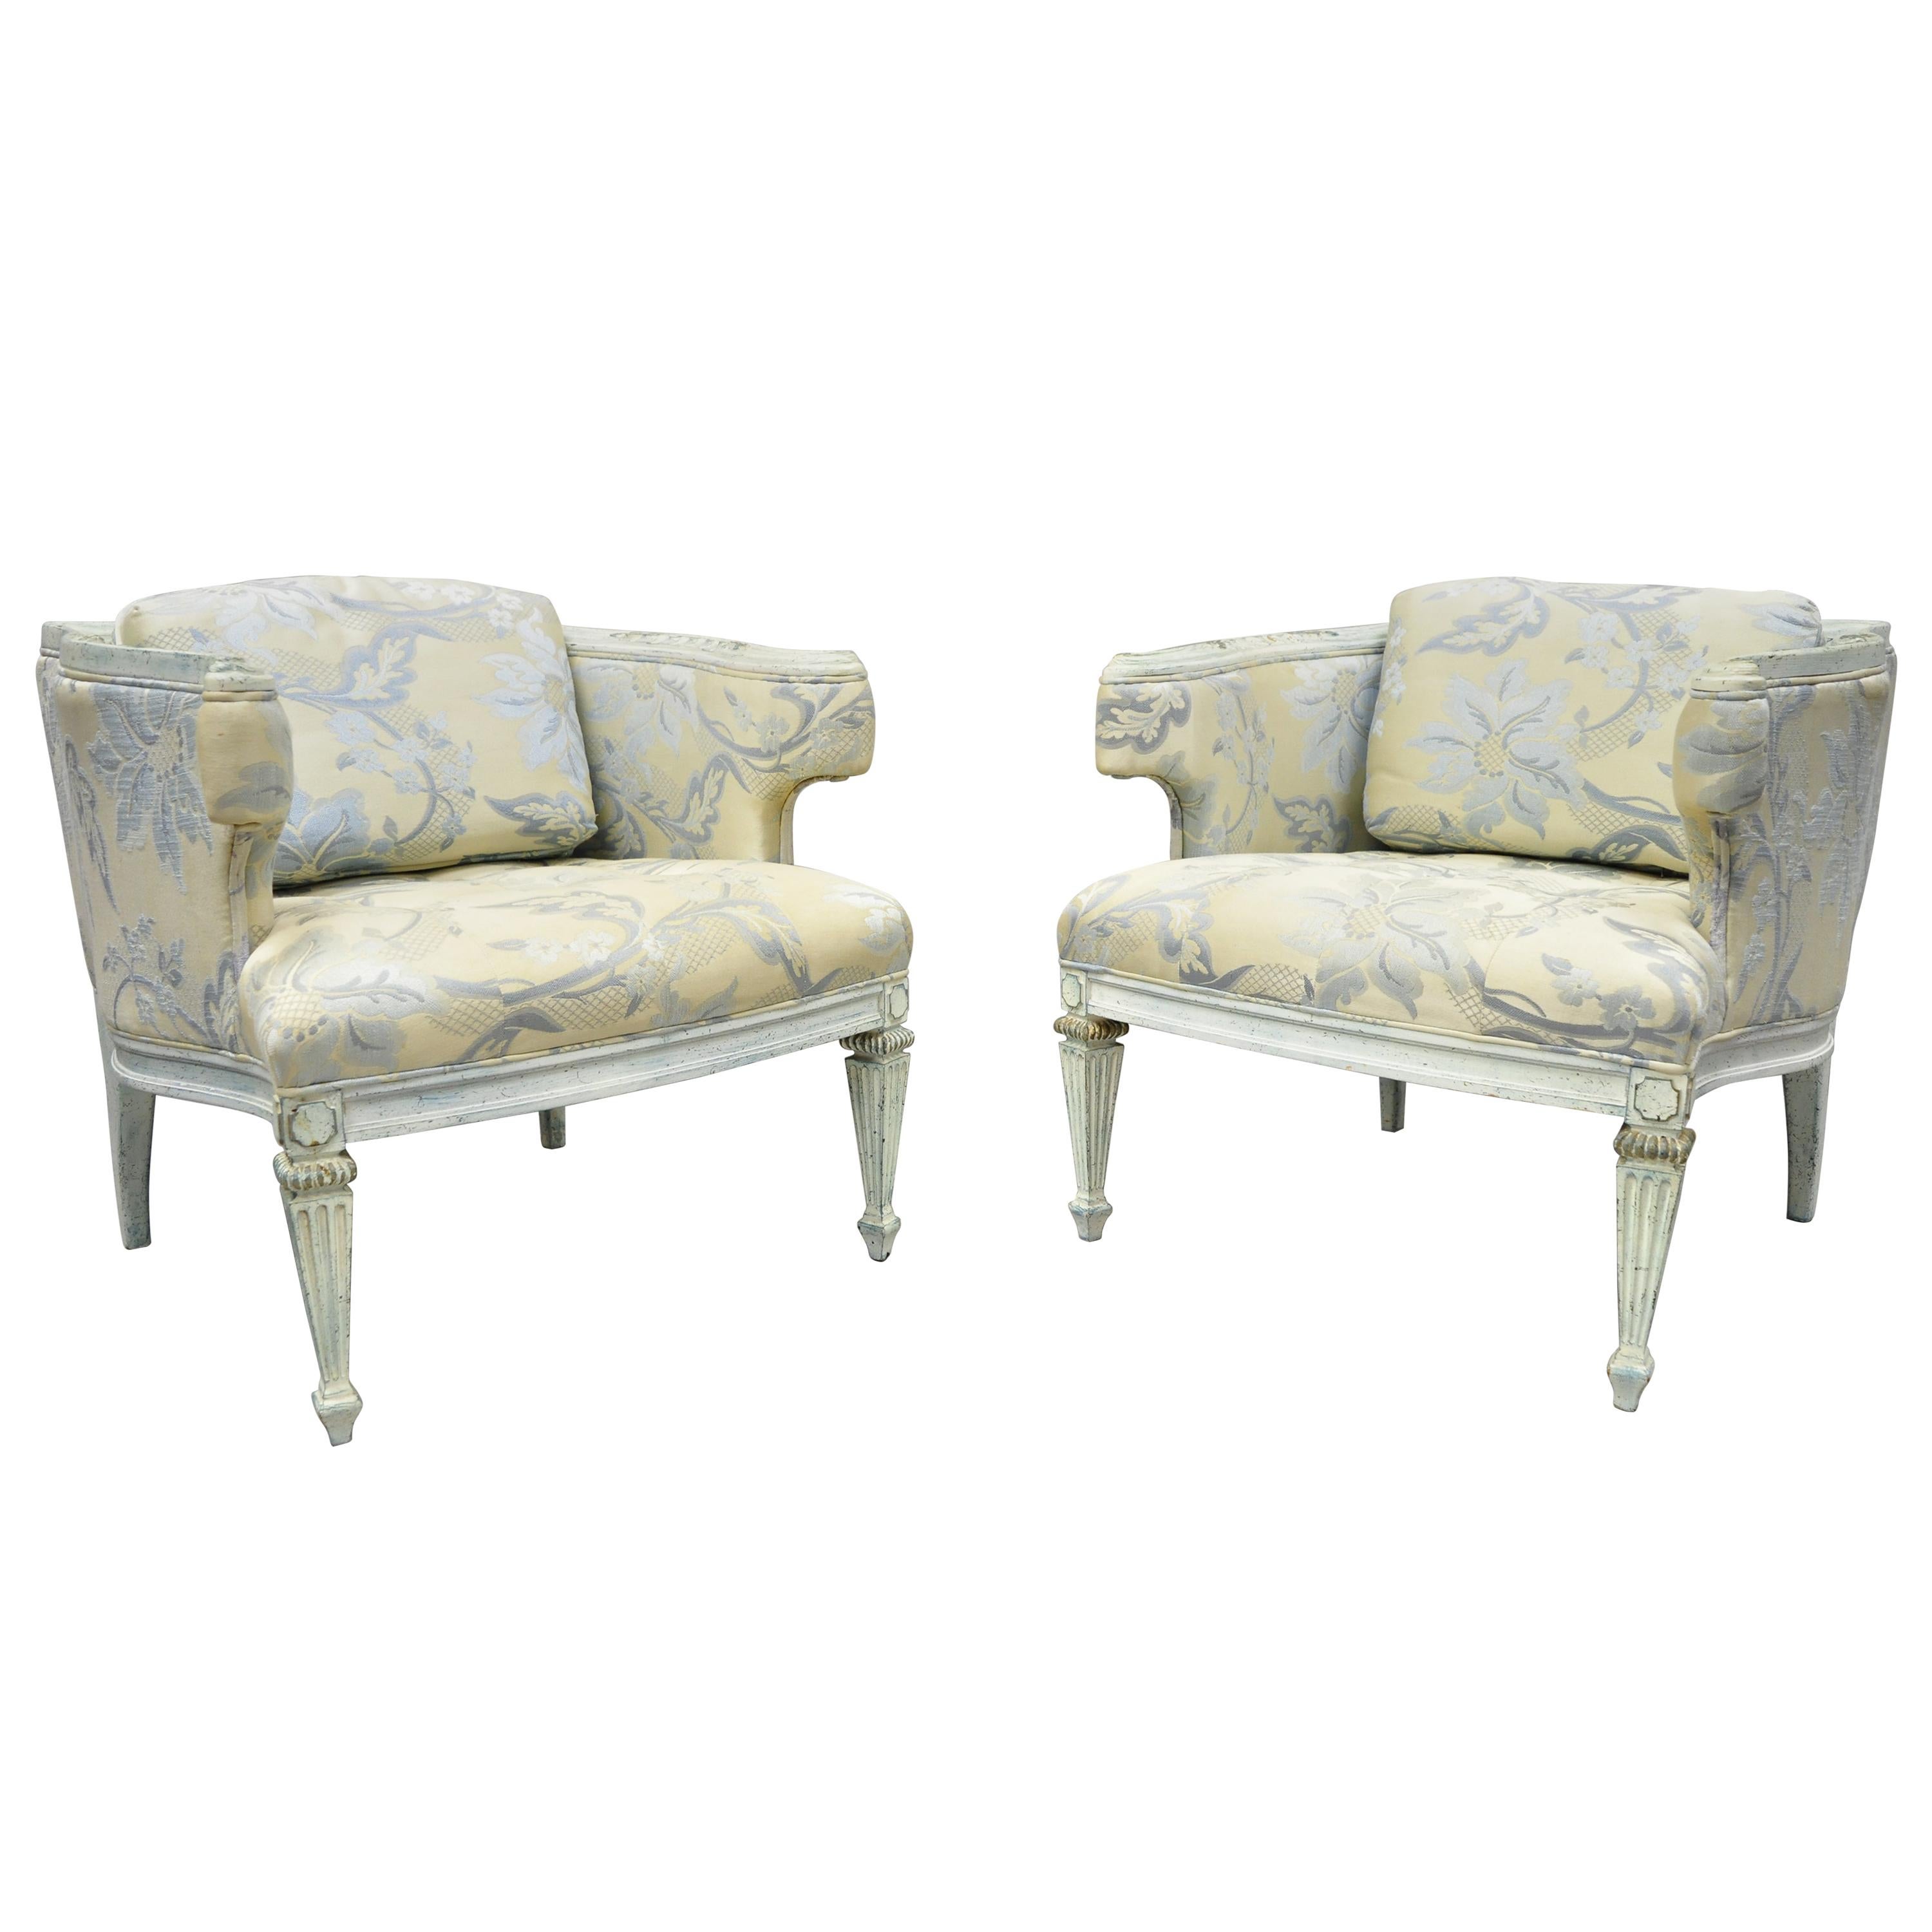 Vintage French Provincial Louis XVI Blue and Cream Painted Club Chairs, a Pair